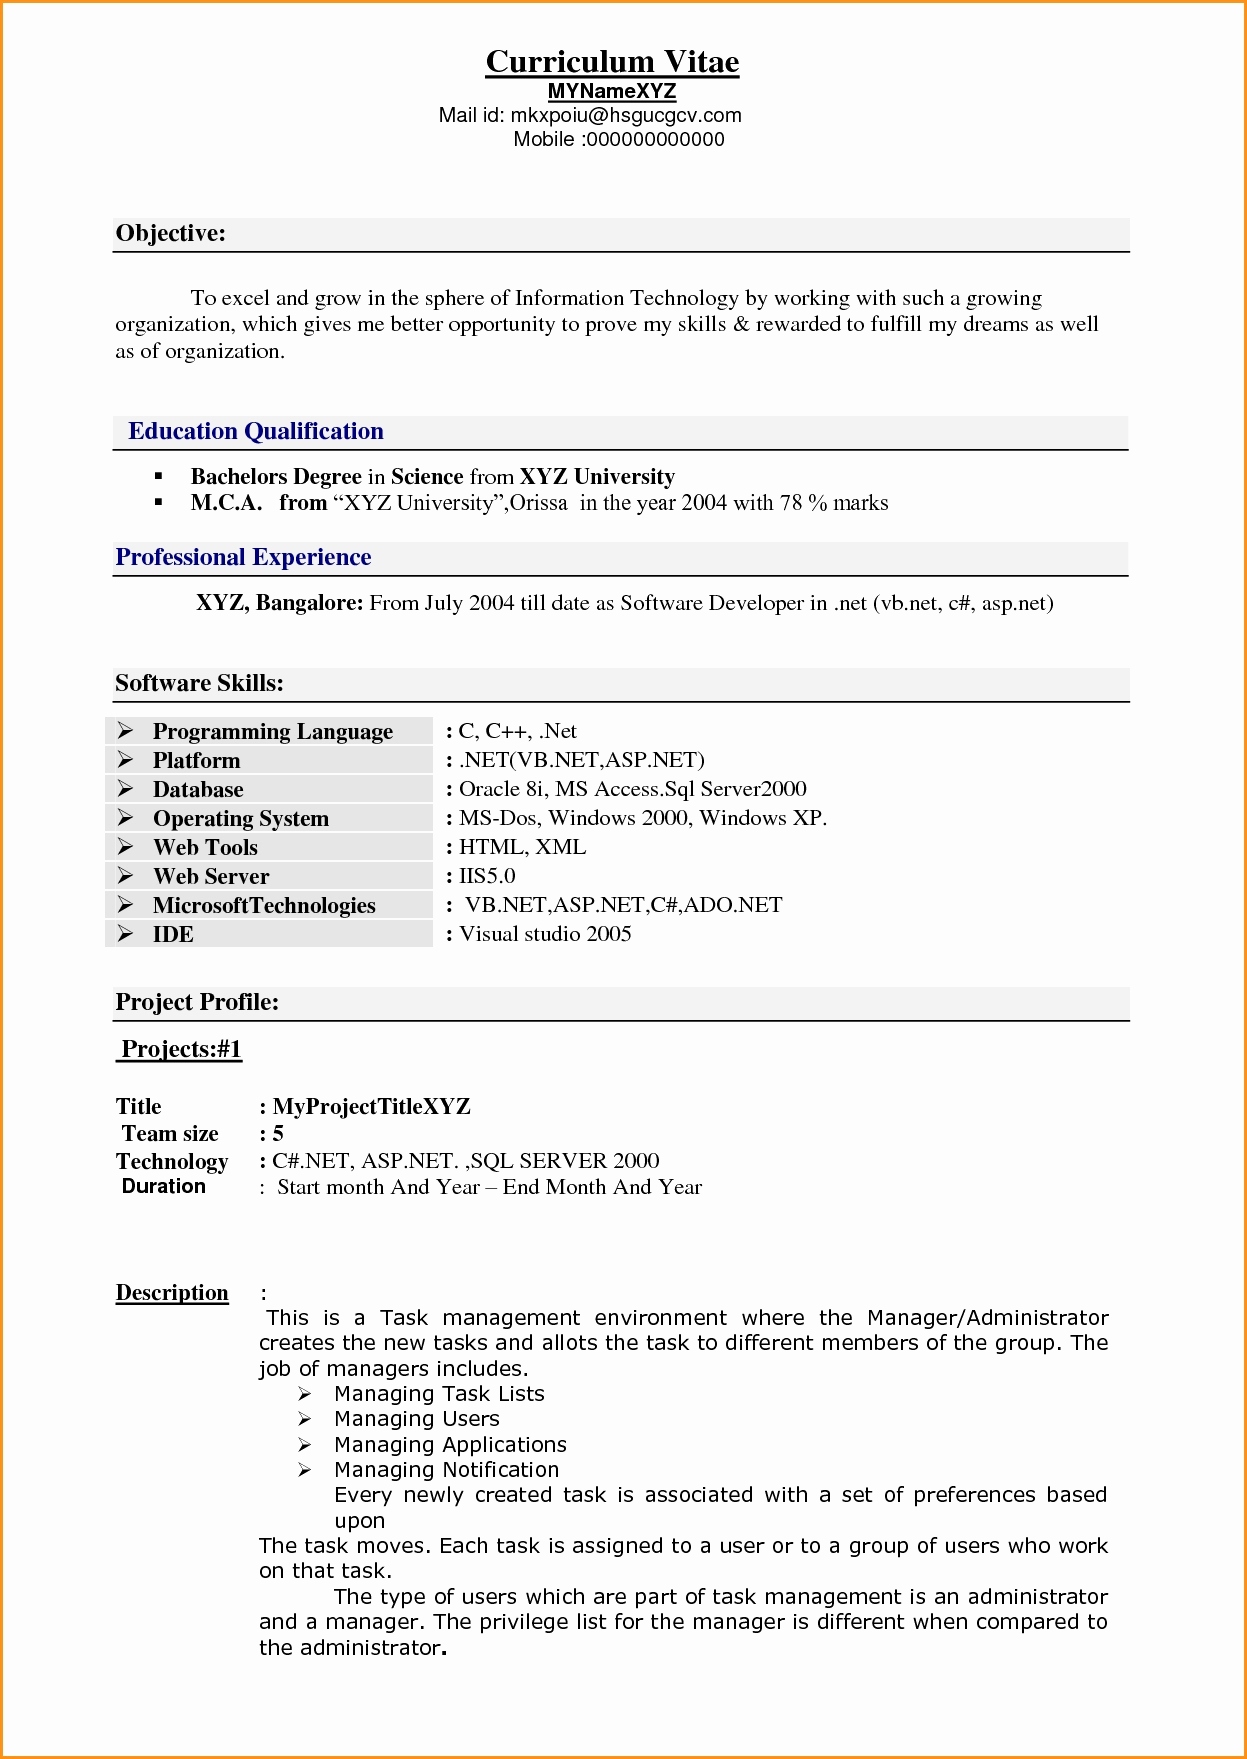 Resume Format 10 Years Experience 